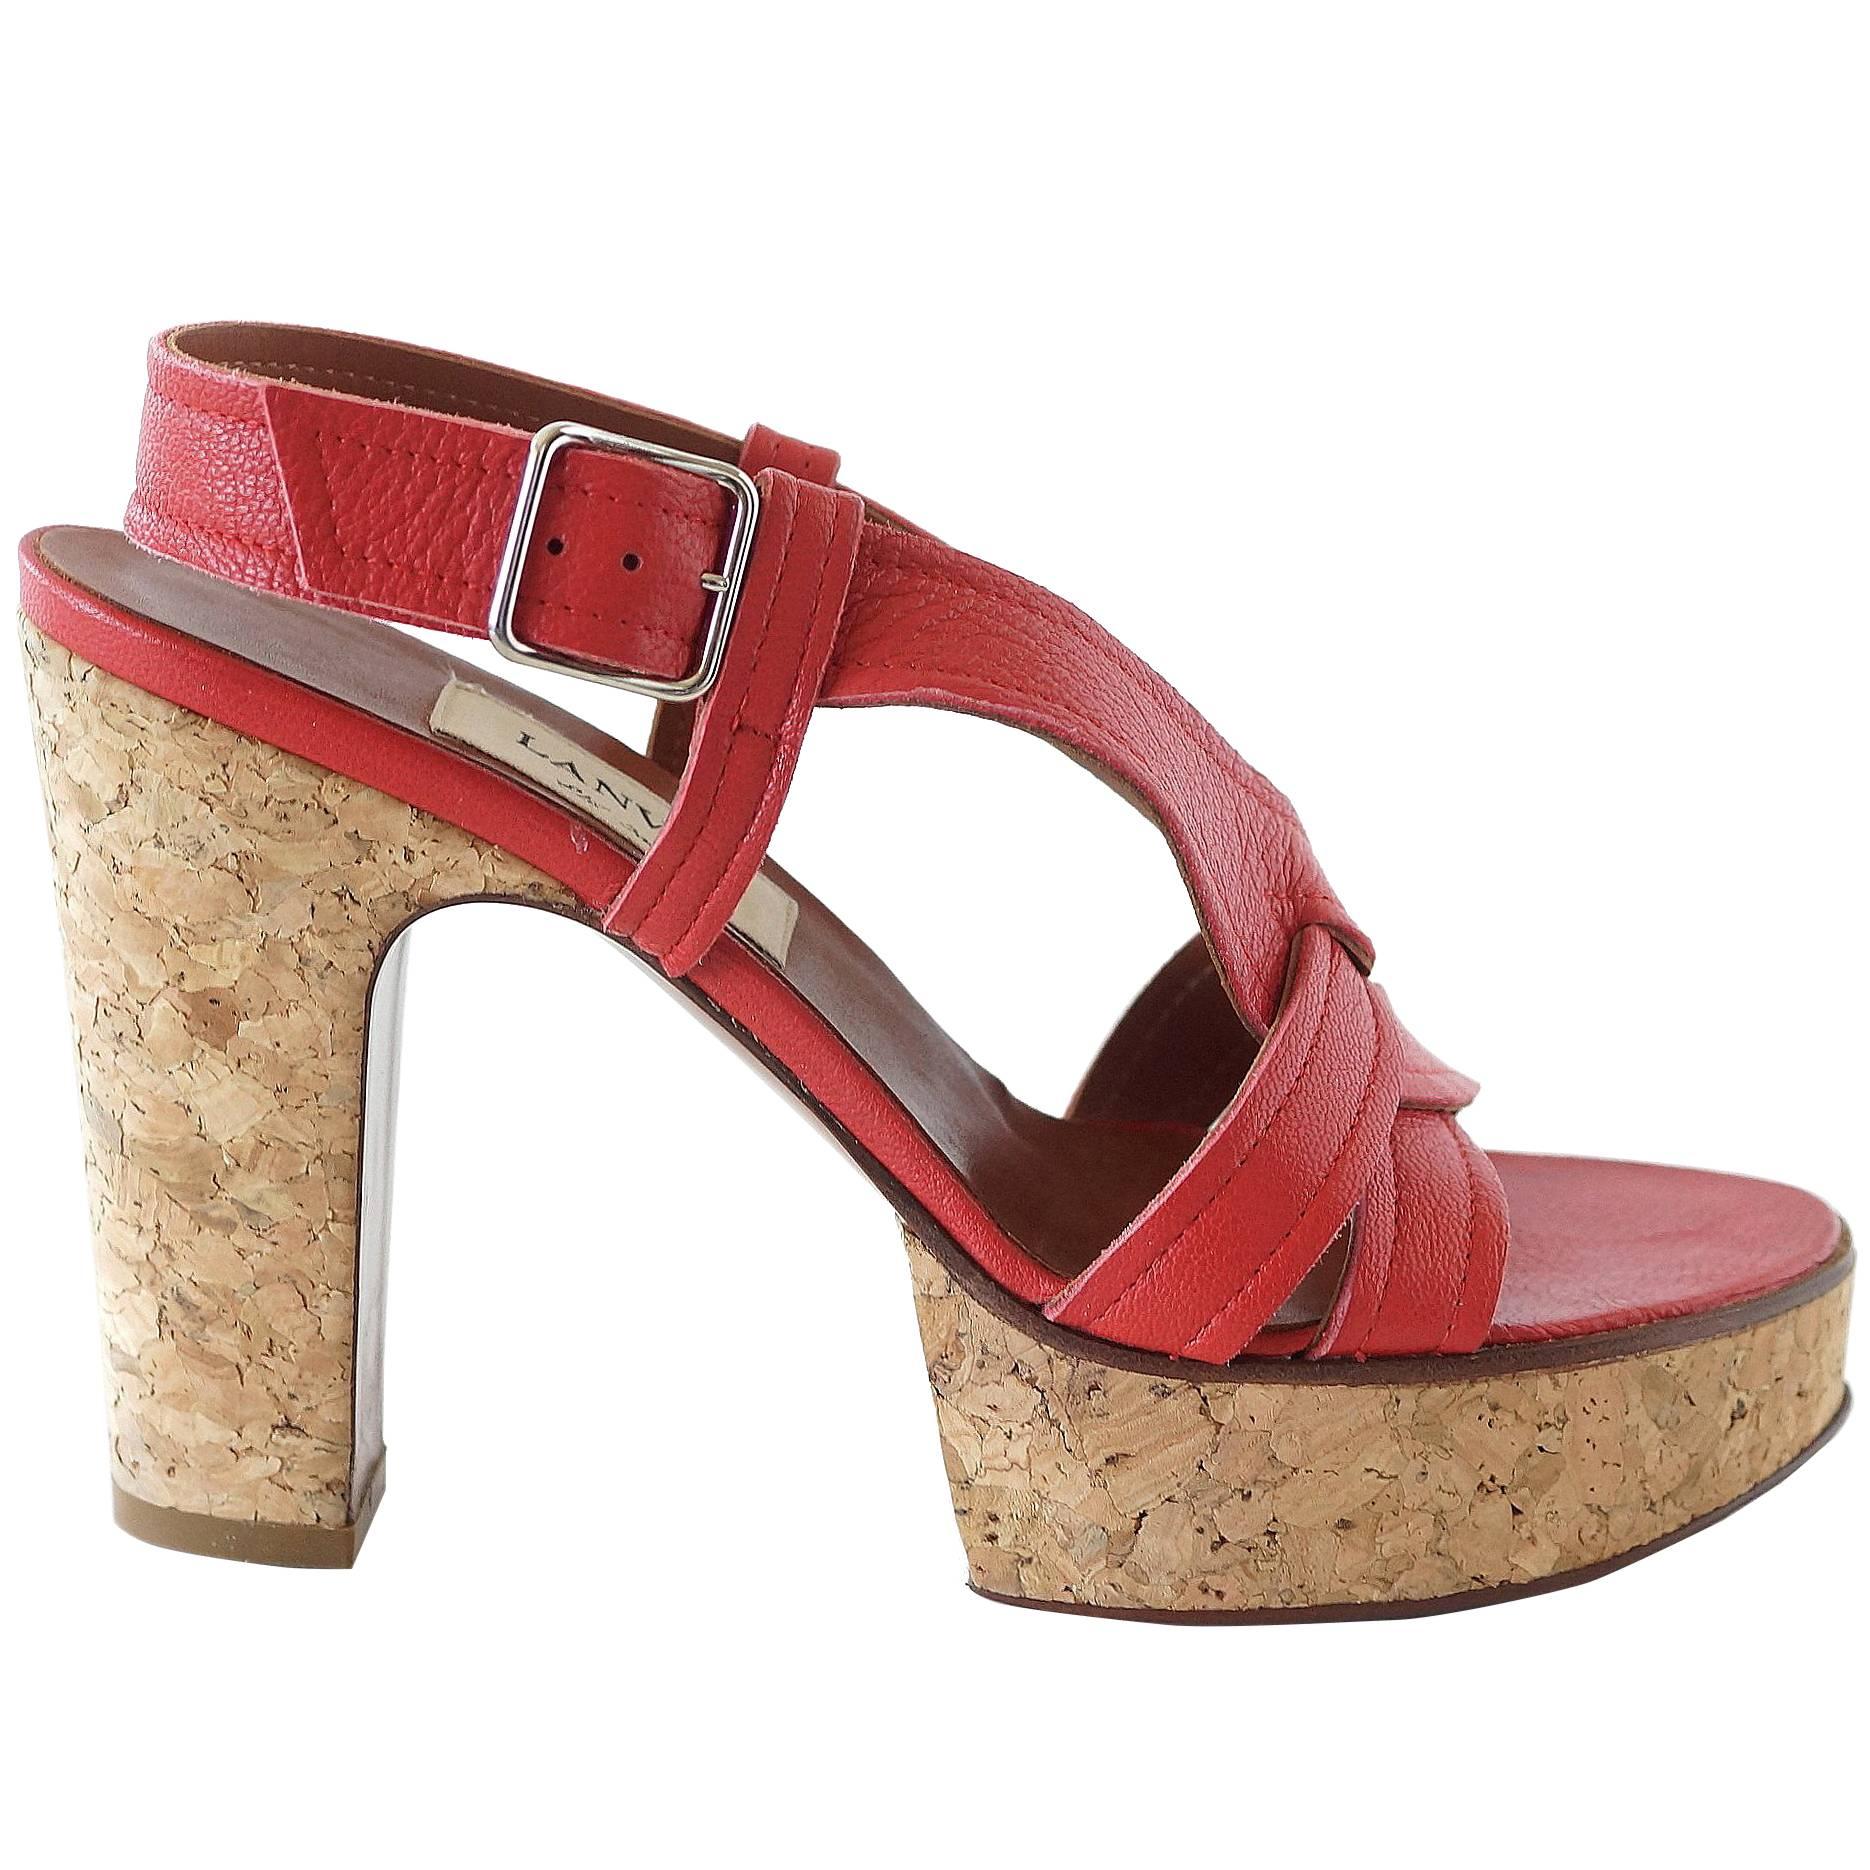 Guaranteed authentic Lanvin fabulous summer shoe!
Bold straps are in the softest and most delicious sumptuous Chevre (goat) leather. 
The front of the foot has a 'weave' effect of leather work.
Sleek and simple silver buckle.
Bold cork heel and